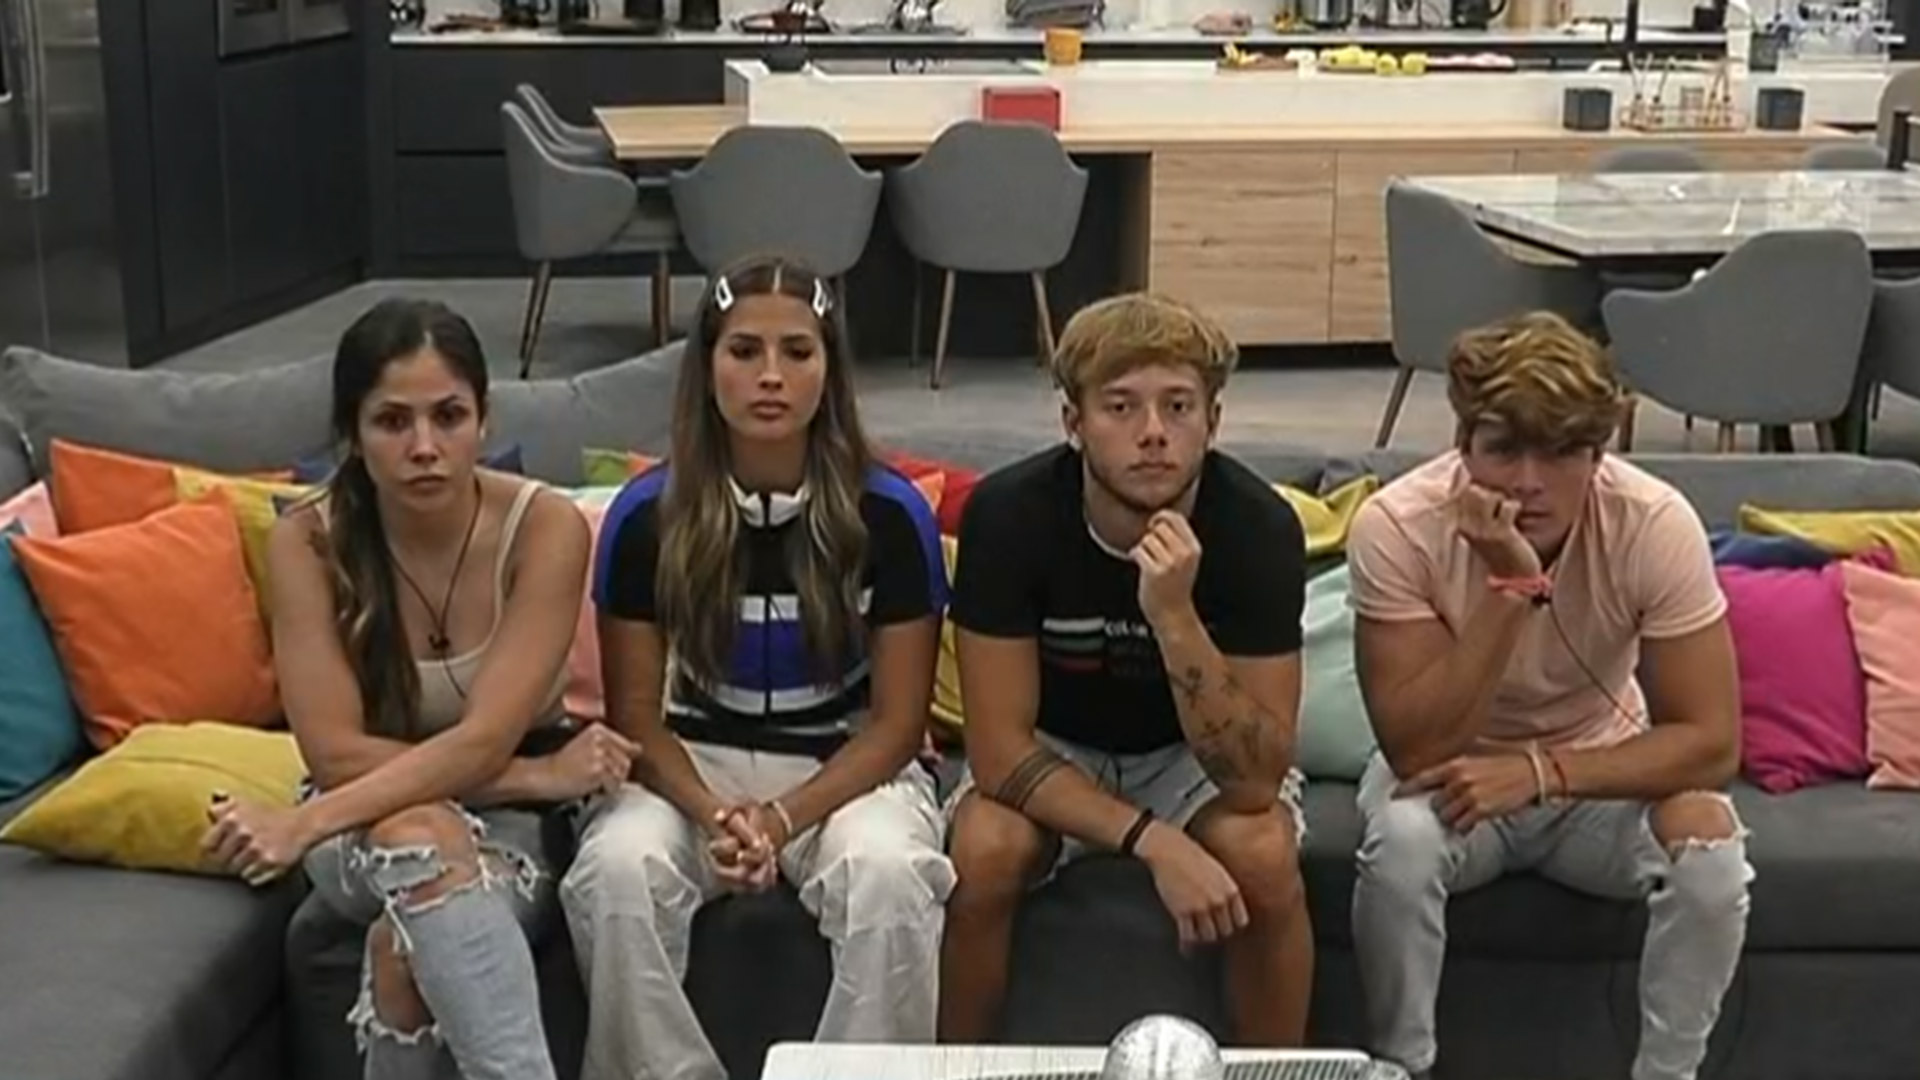 Romina, Julieta, Nacho and Marcos, the finalists of Big Brother